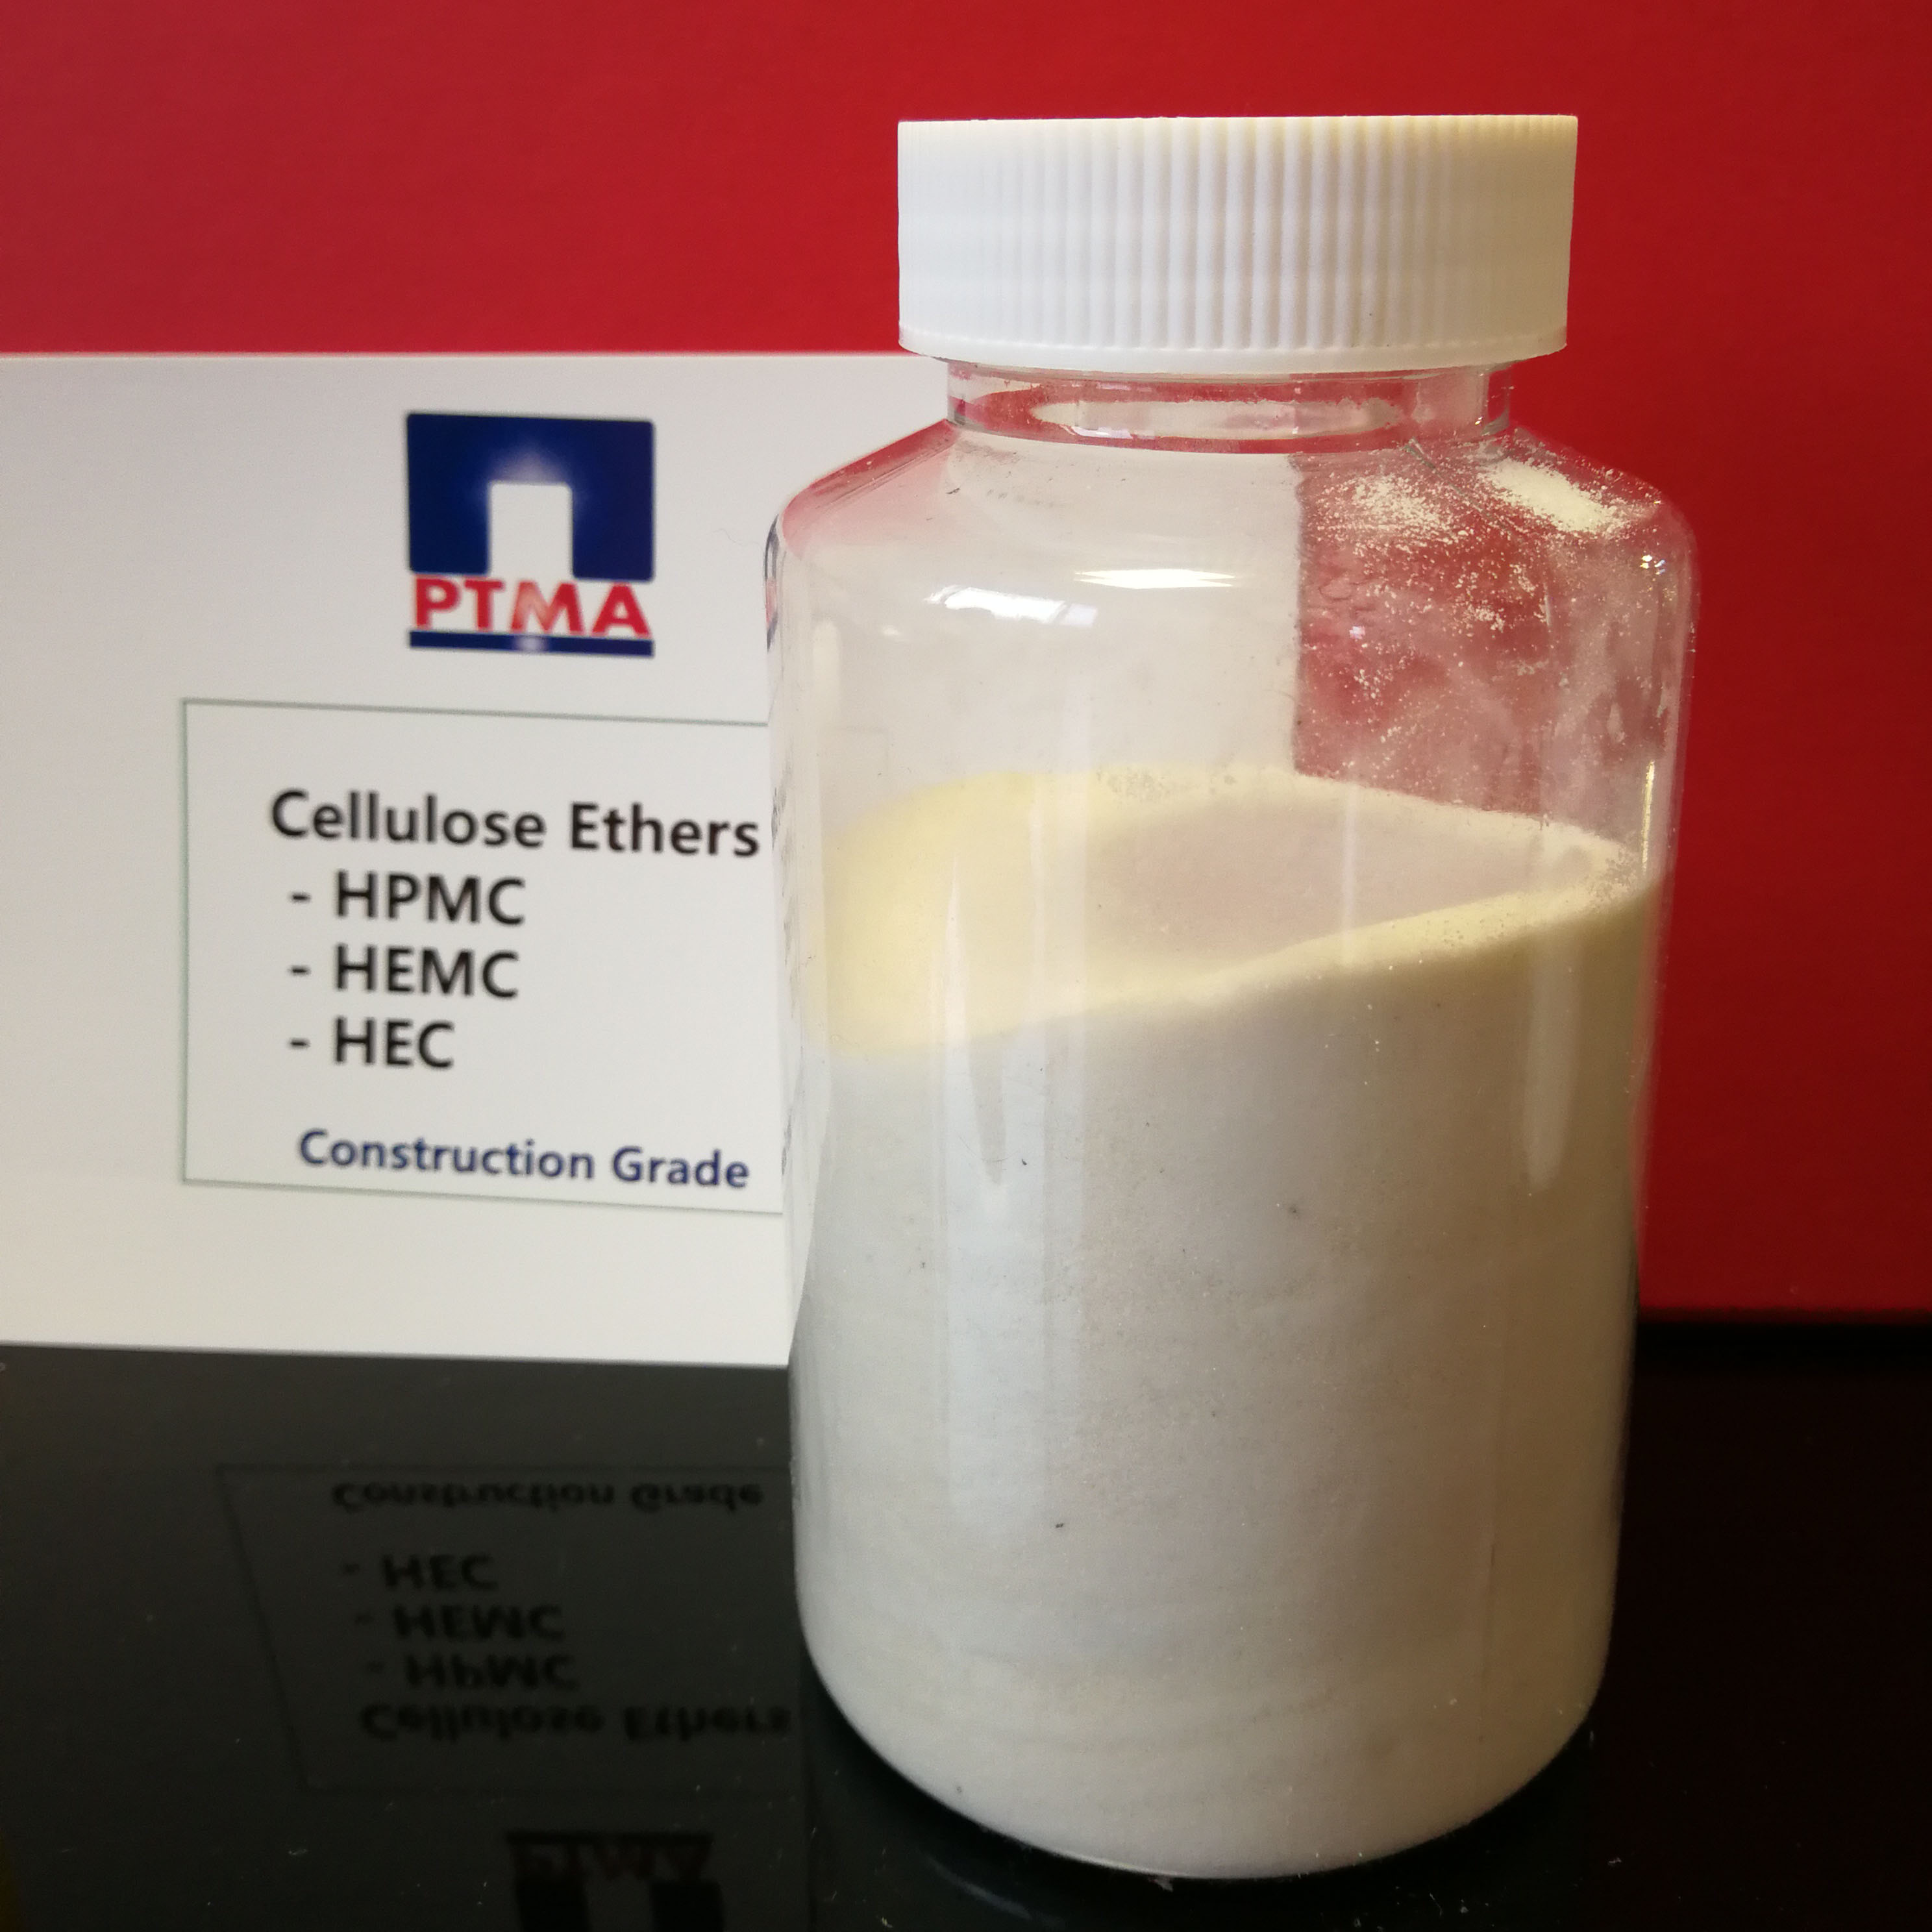 HPMC Cellulose Ethers Admixtures for Construction Mortar